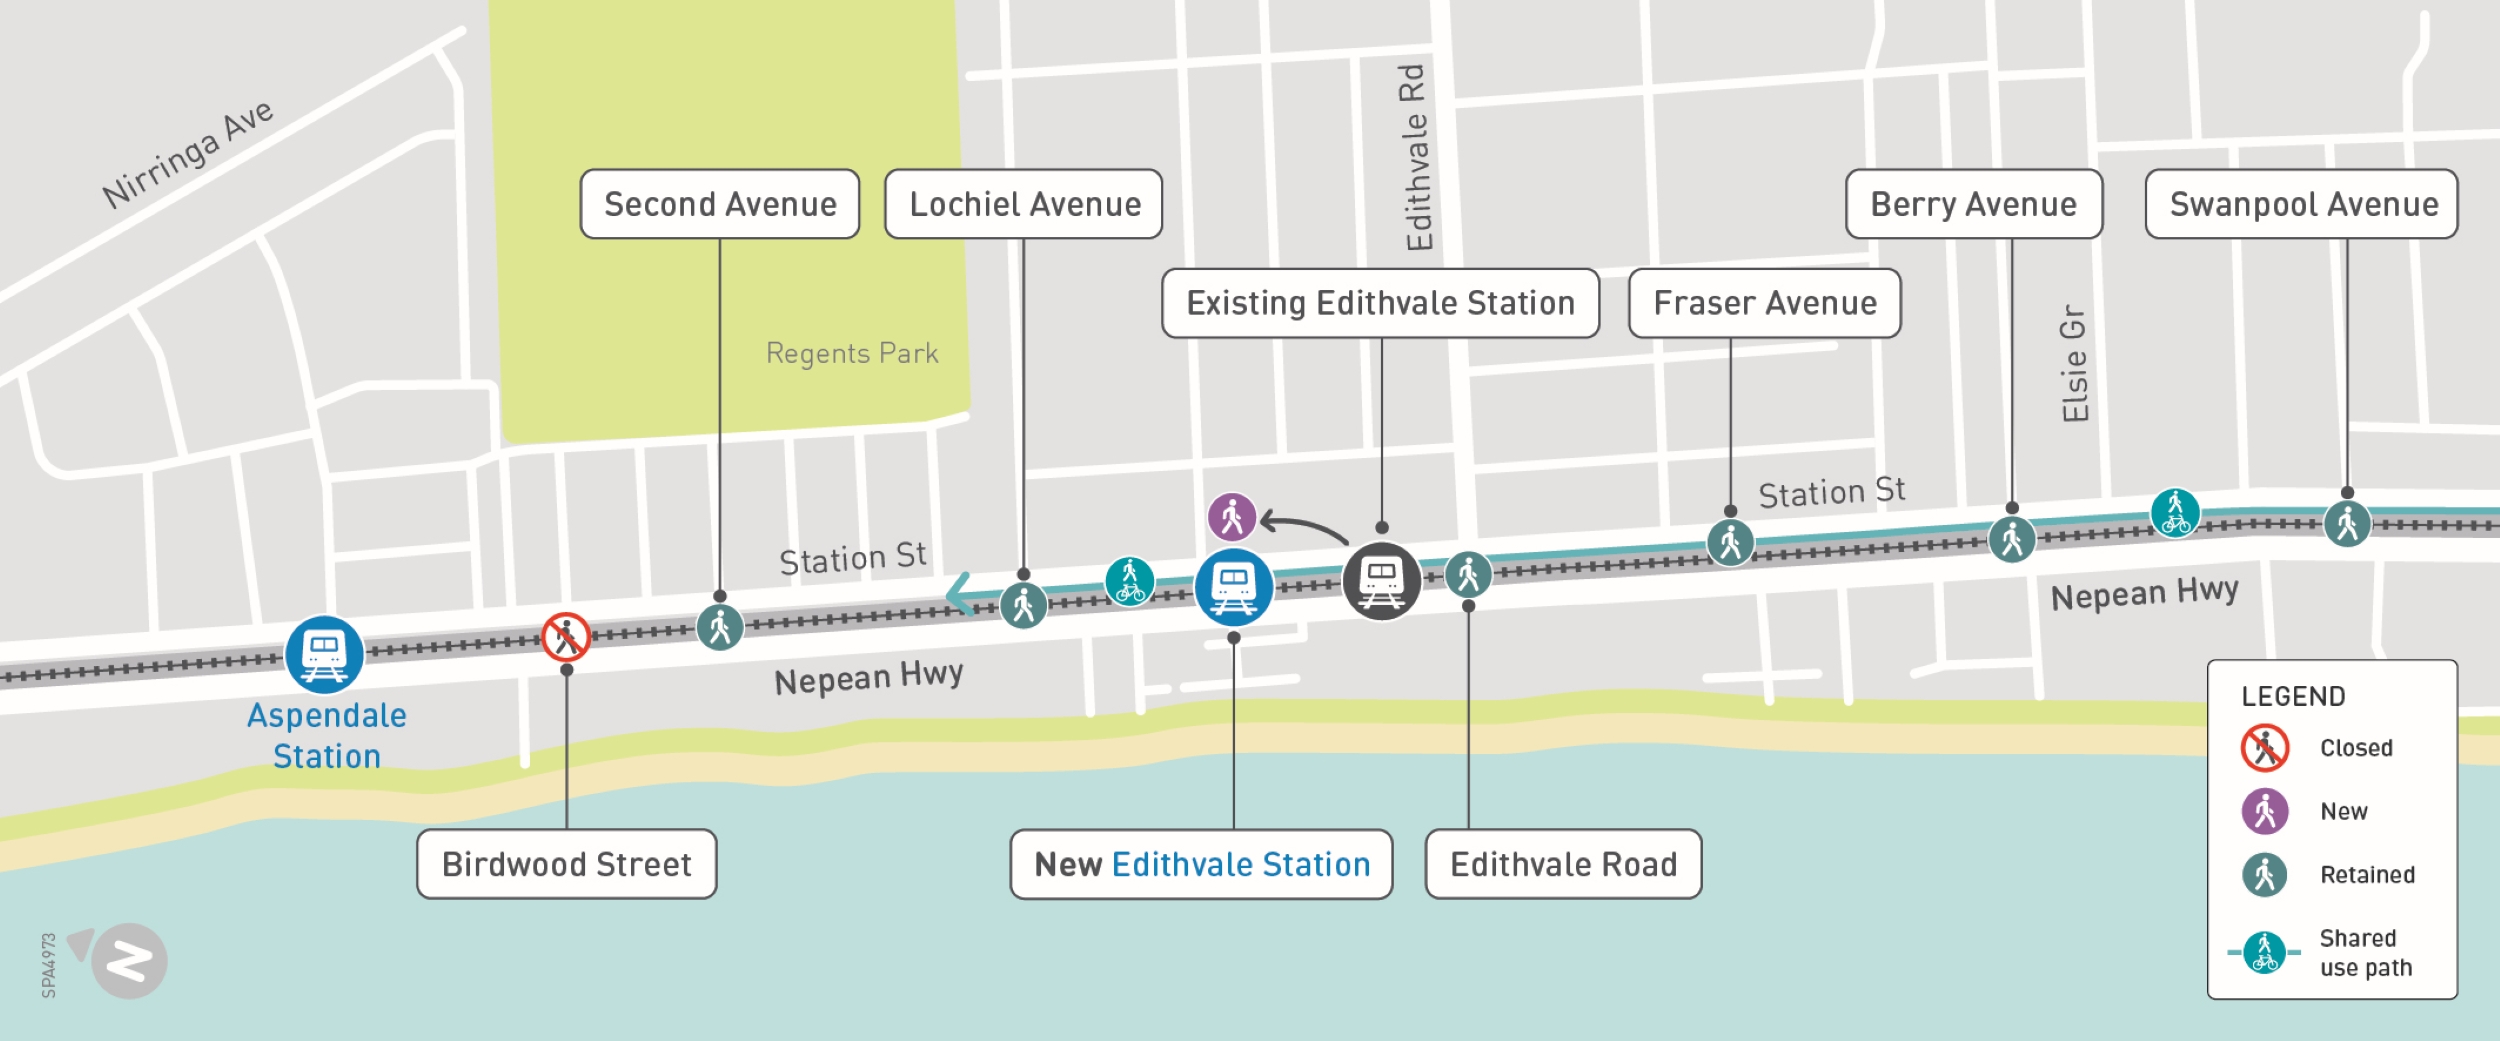 Map of Aspendale to Chelsea with closed pedestrian connection at Birdwood Street. Access at Second Avenue, Lochiel Avenue, Edithvale Road, Fraser Avenue, Berry Avenue and Swanpool Avenue.